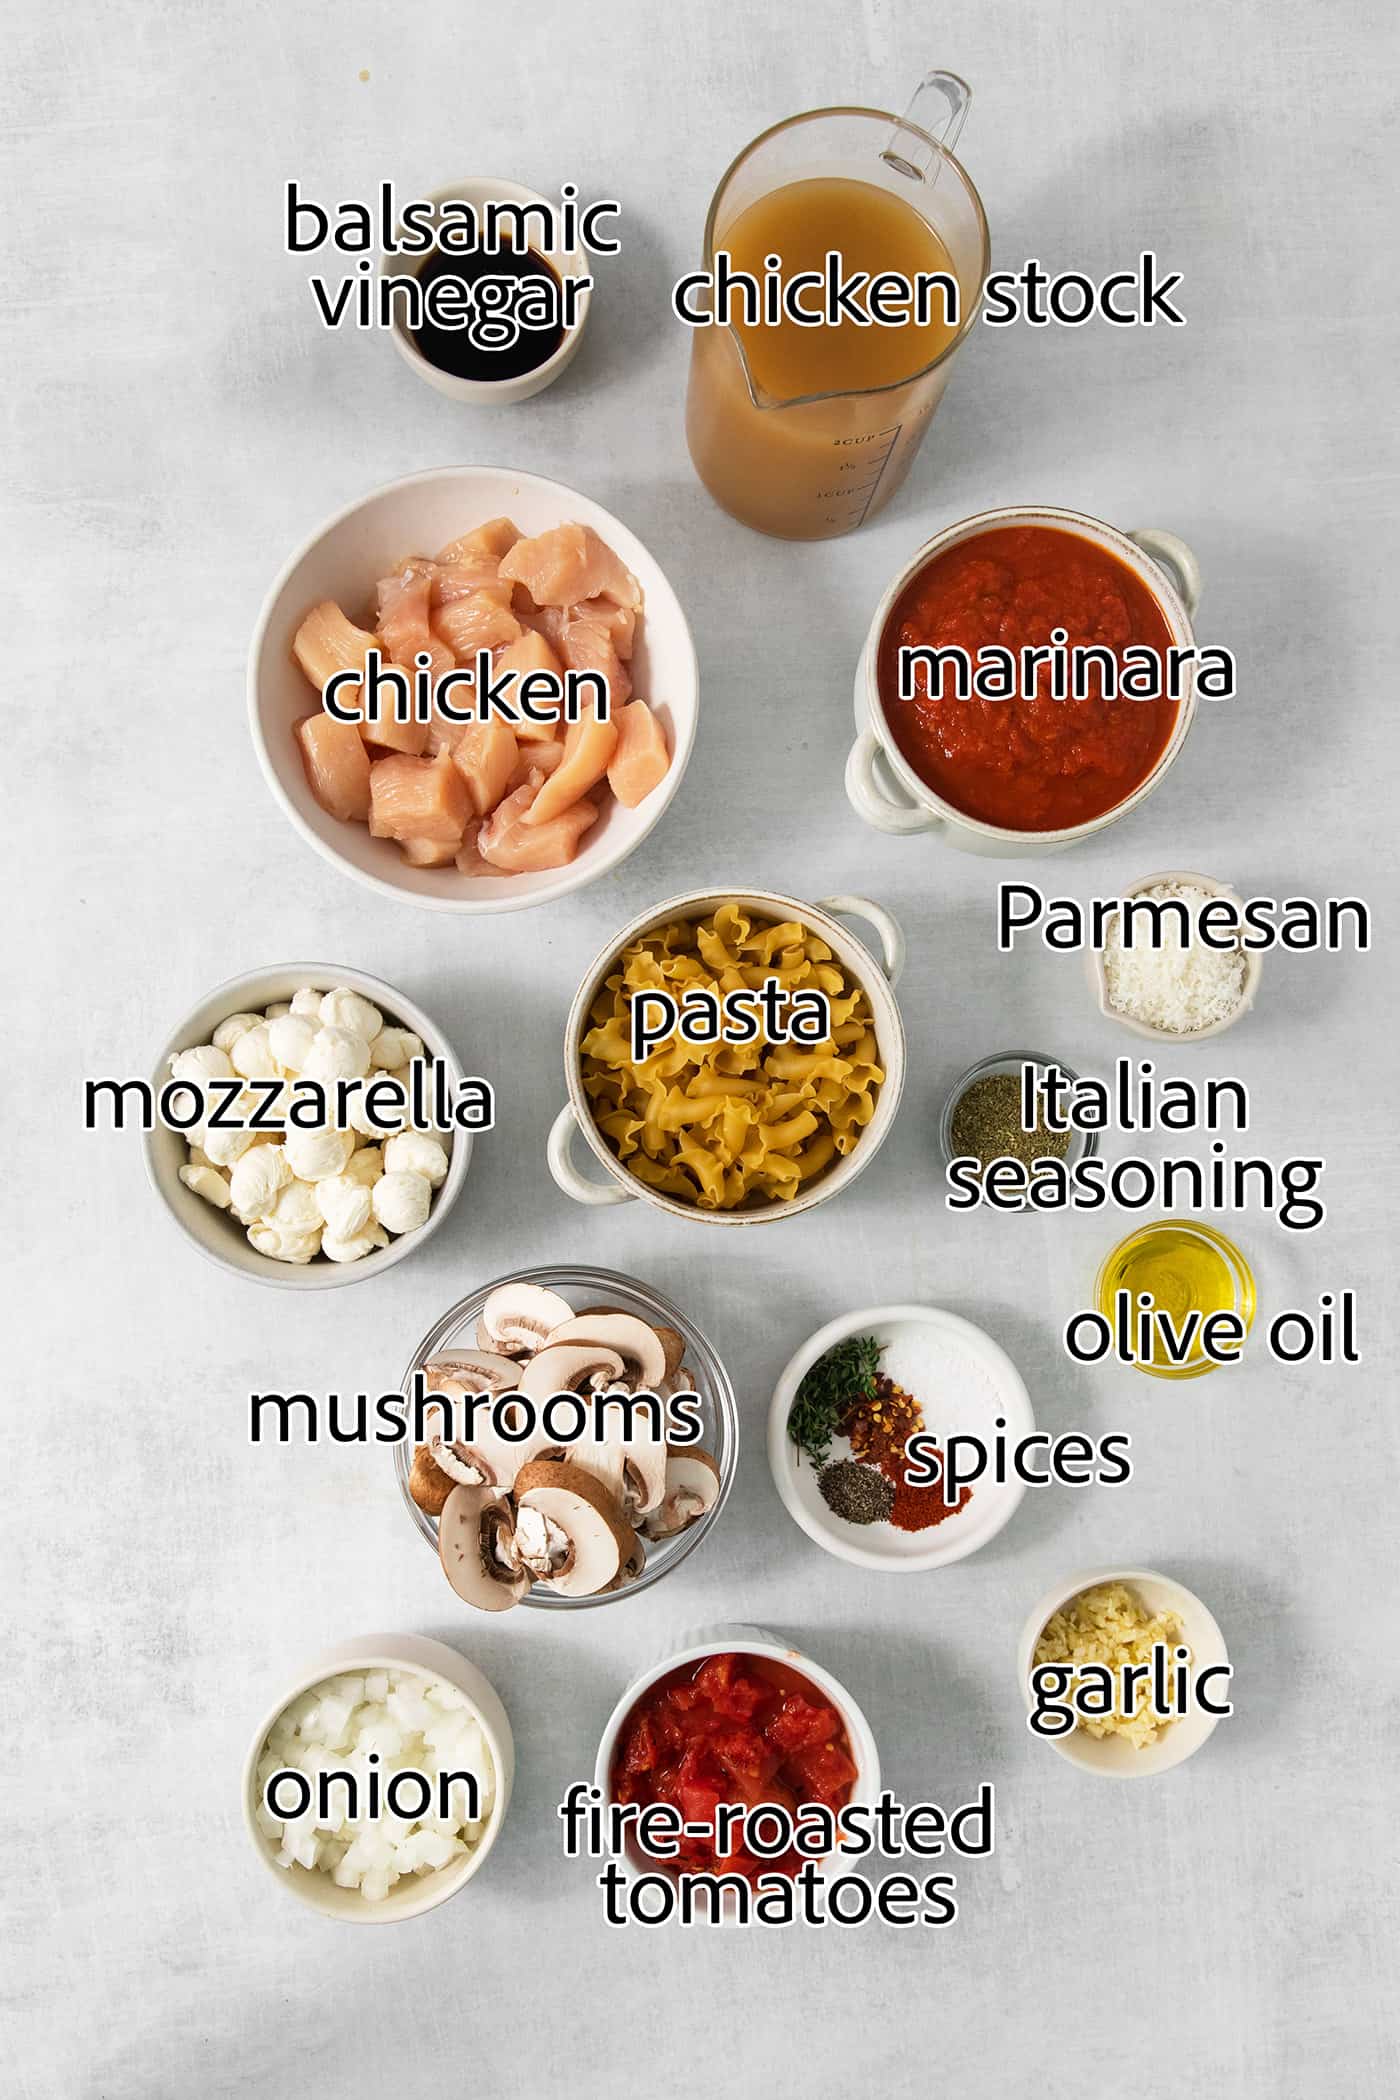 The ingredients for slow cooker lasagna soup are shown: chicken, canned tomatoes, spices, red pepper flakes, fresh mozzarella, parmesan, pasta, chicken broth, olive oil, garlic, mushrooms, salt and pepper.